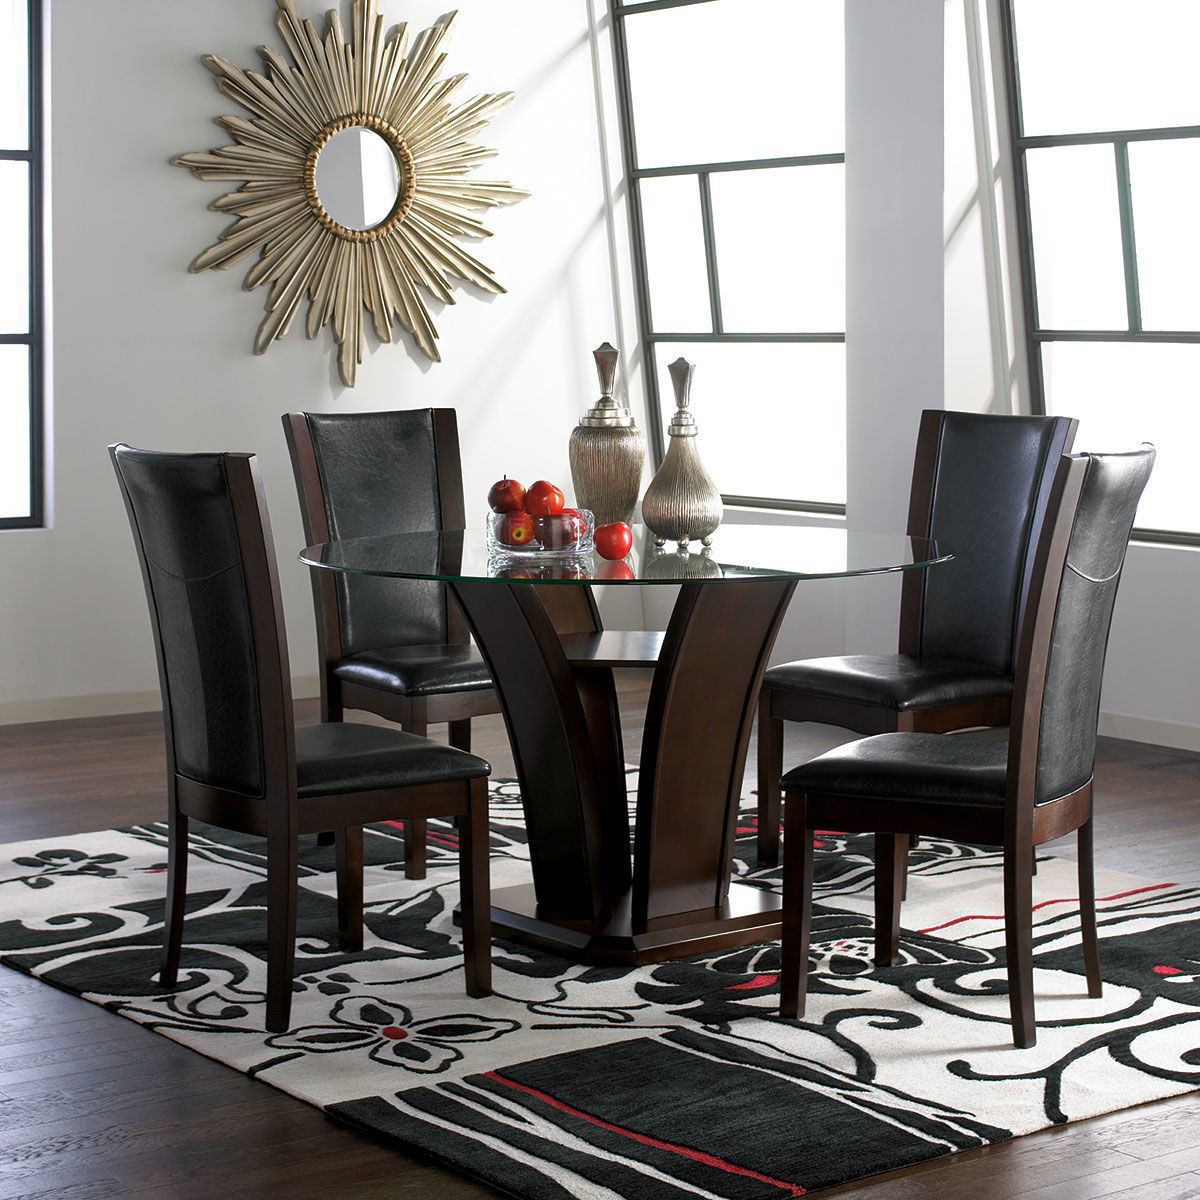 TORY 5 PIECE ROUND DINING SET | Badcock Home Furniture &more